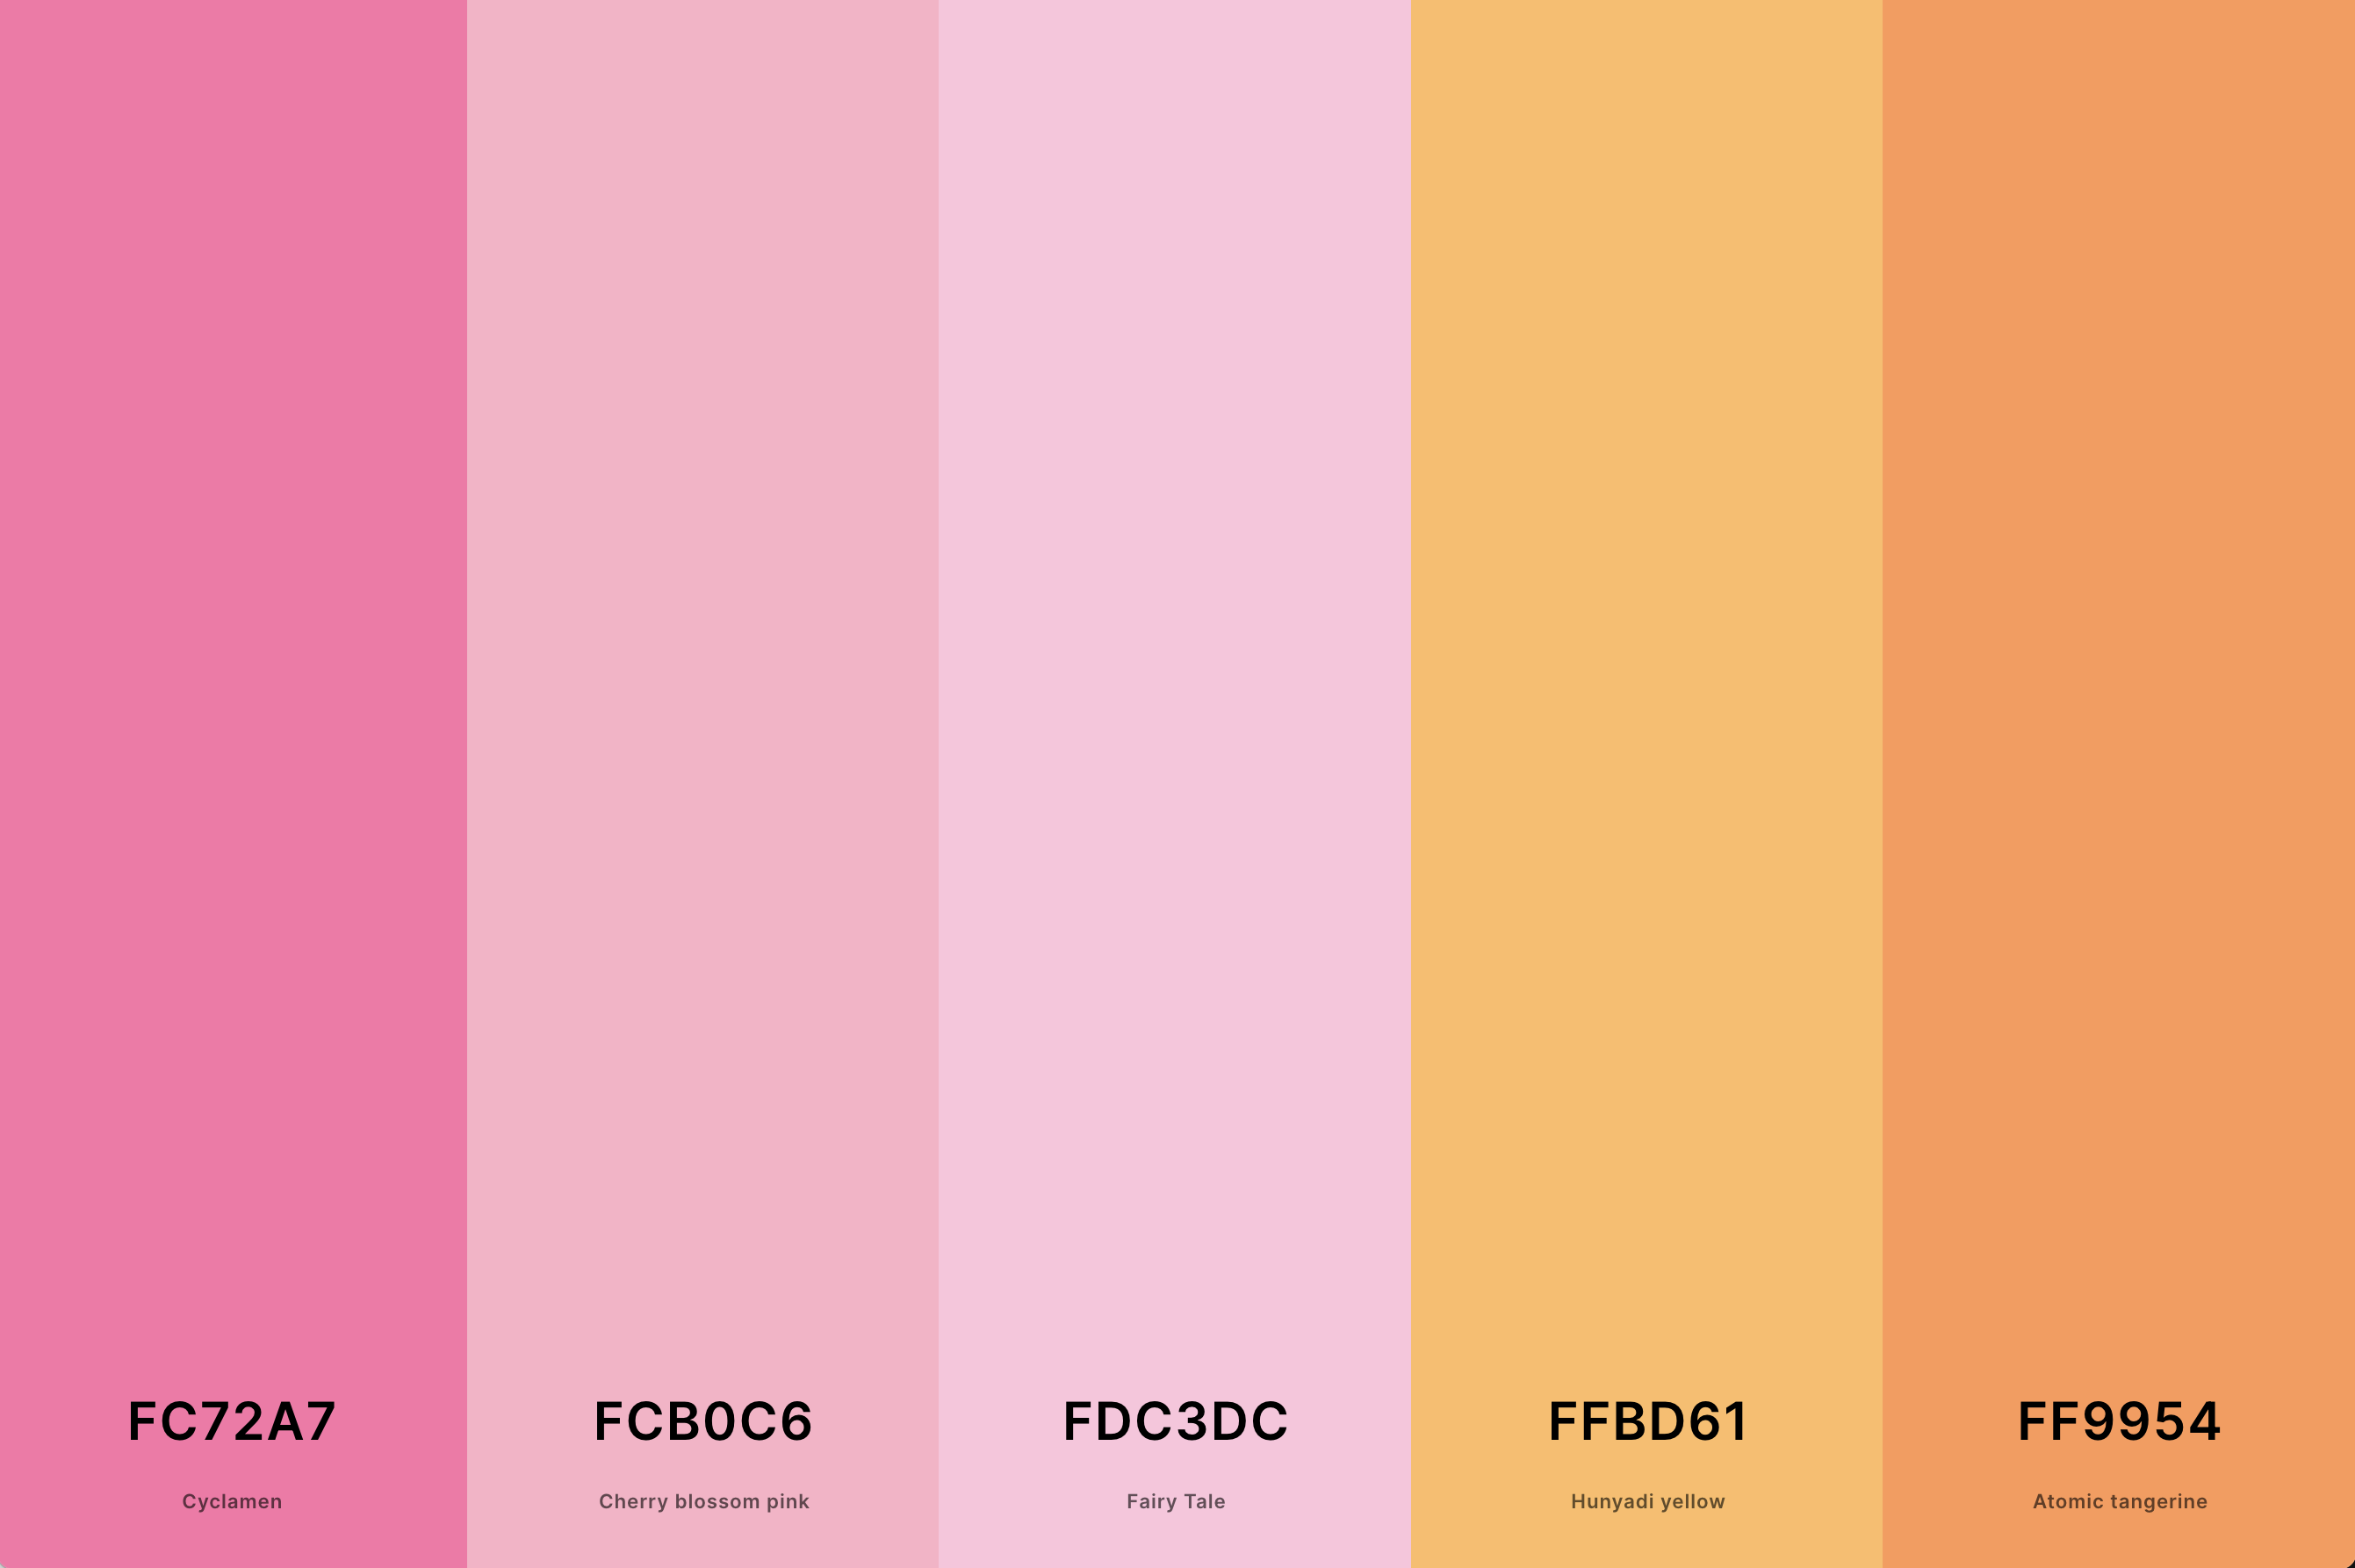 8. Pink And Orange Color Palette Color Palette with Cyclamen (Hex #FC72A7) + Cherry Blossom Pink (Hex #FCB0C6) + Fairy Tale (Hex #FDC3DC) + Hunyadi Yellow (Hex #FFBD61) + Atomic Tangerine (Hex #FF9954) Color Palette with Hex Codes